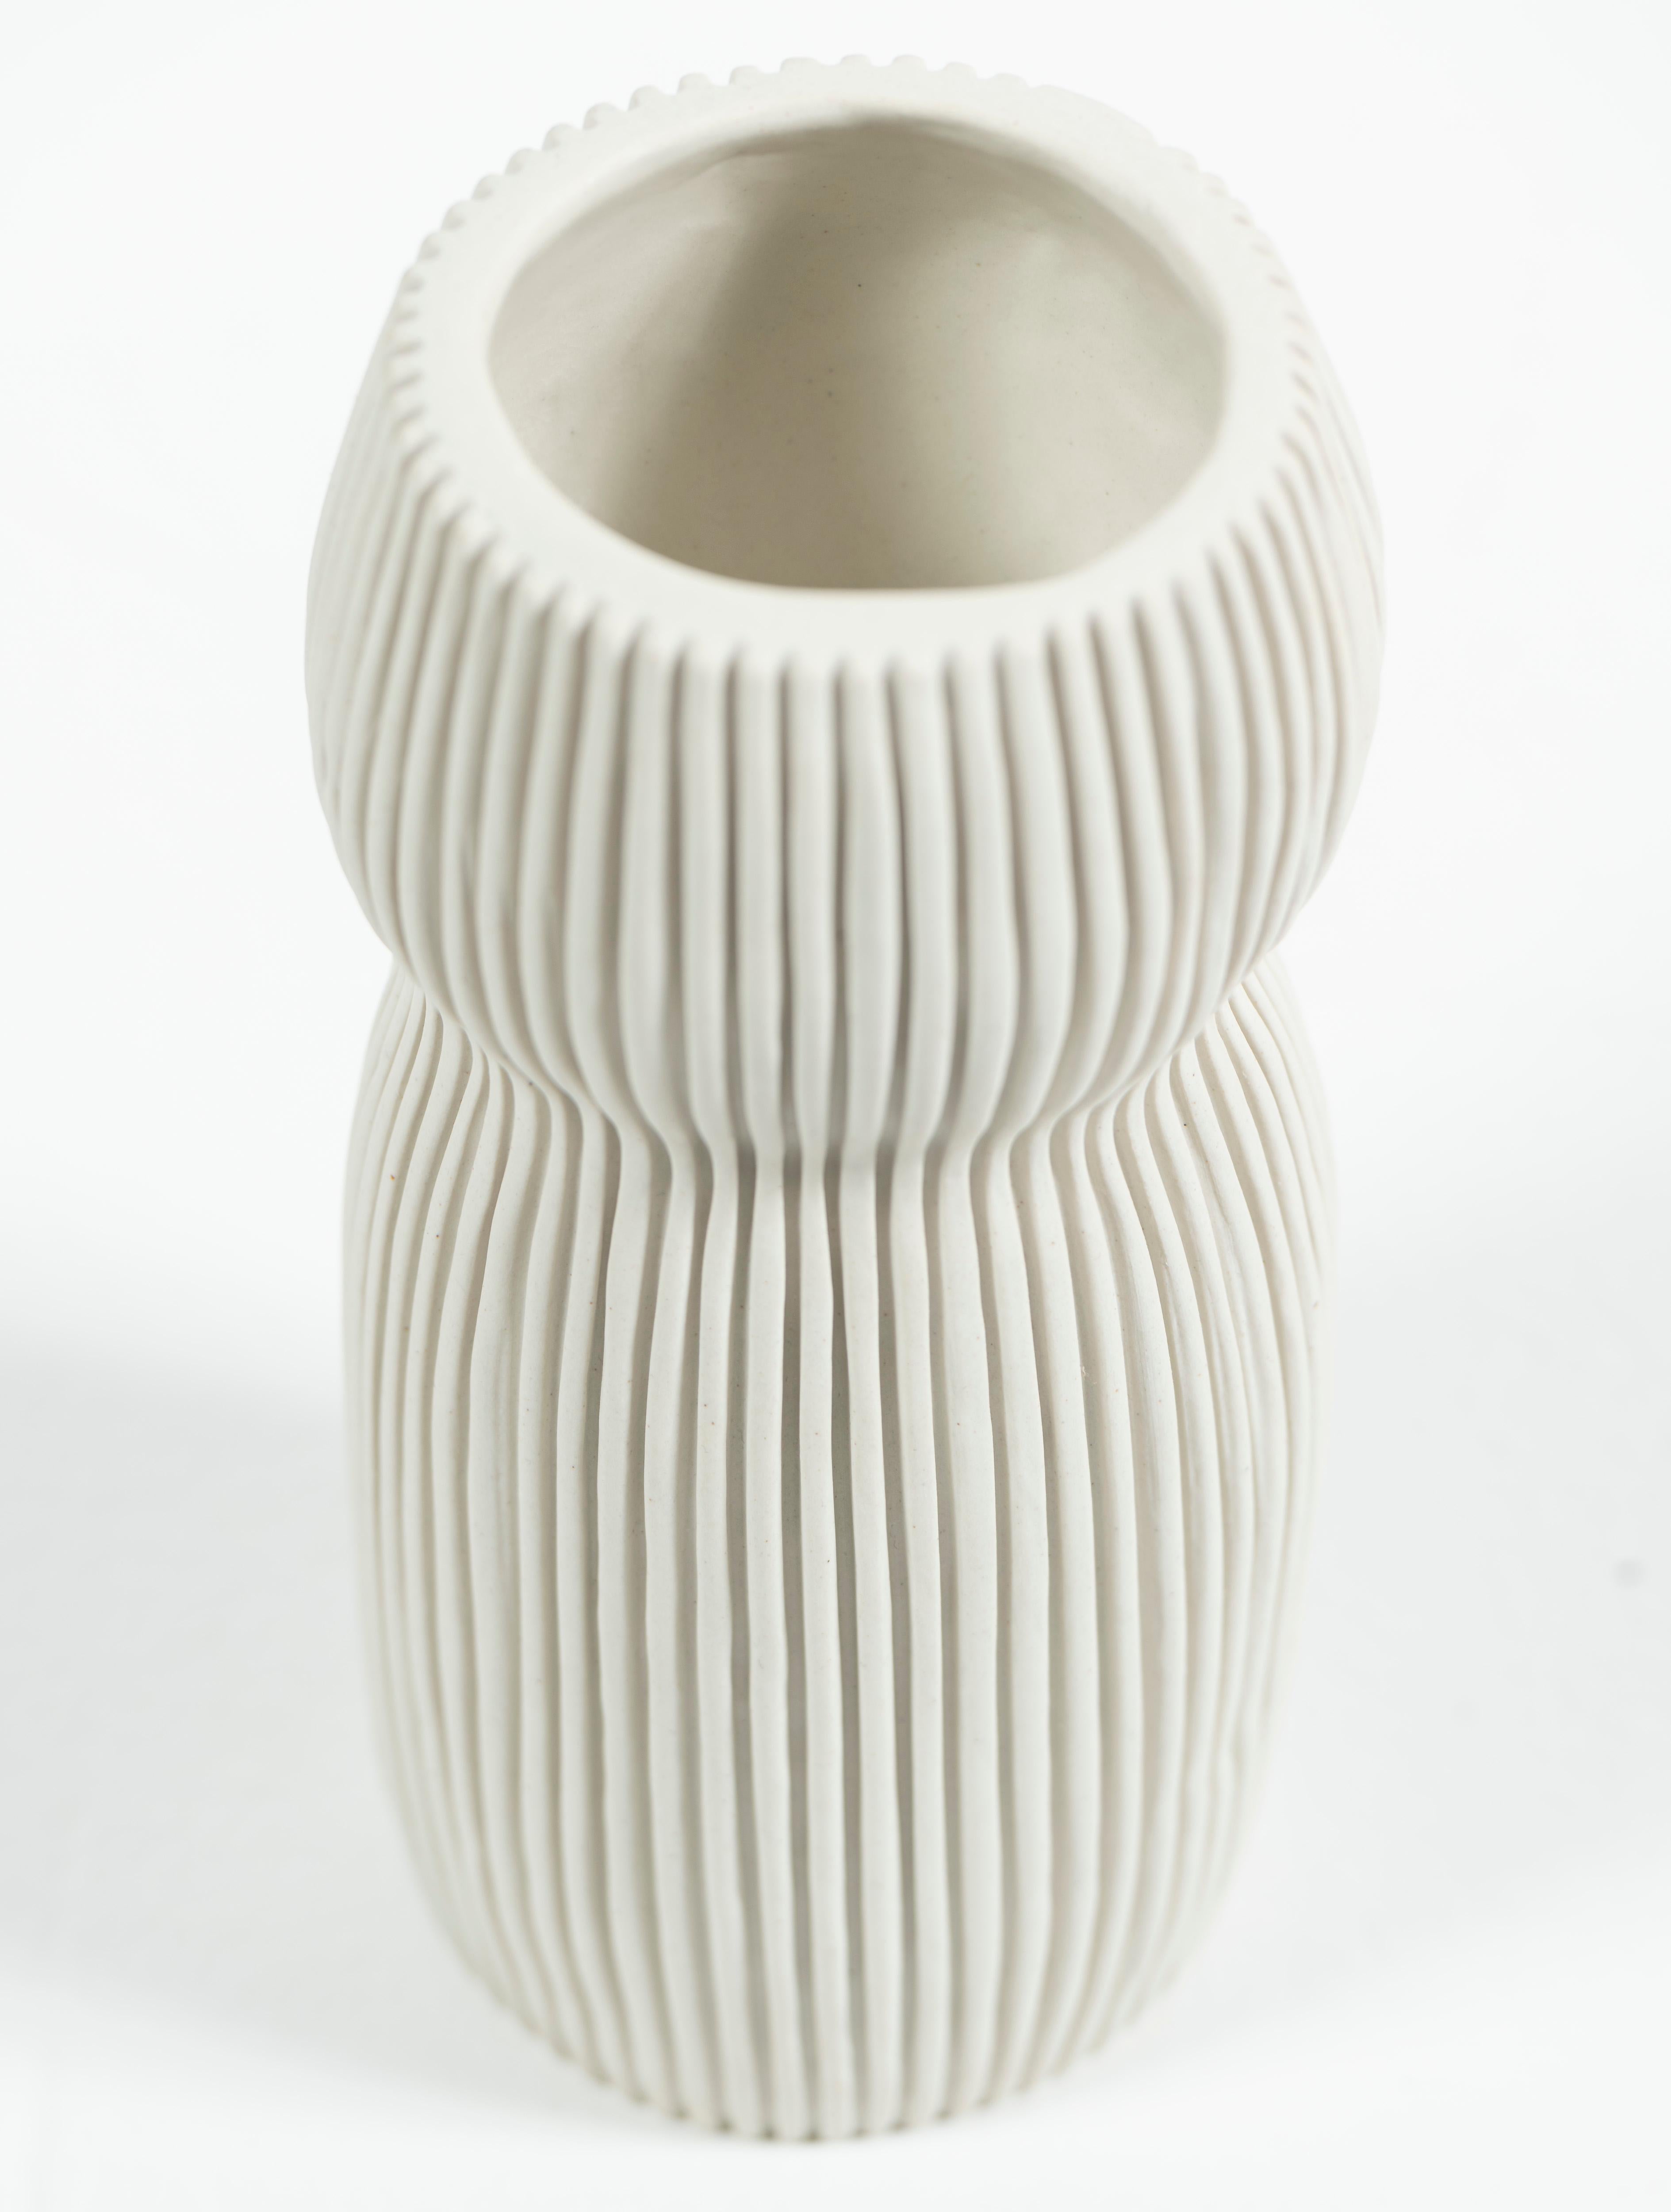 Hand Crafted Contemporary Ceramic Vase in Cream, signed For Sale 3